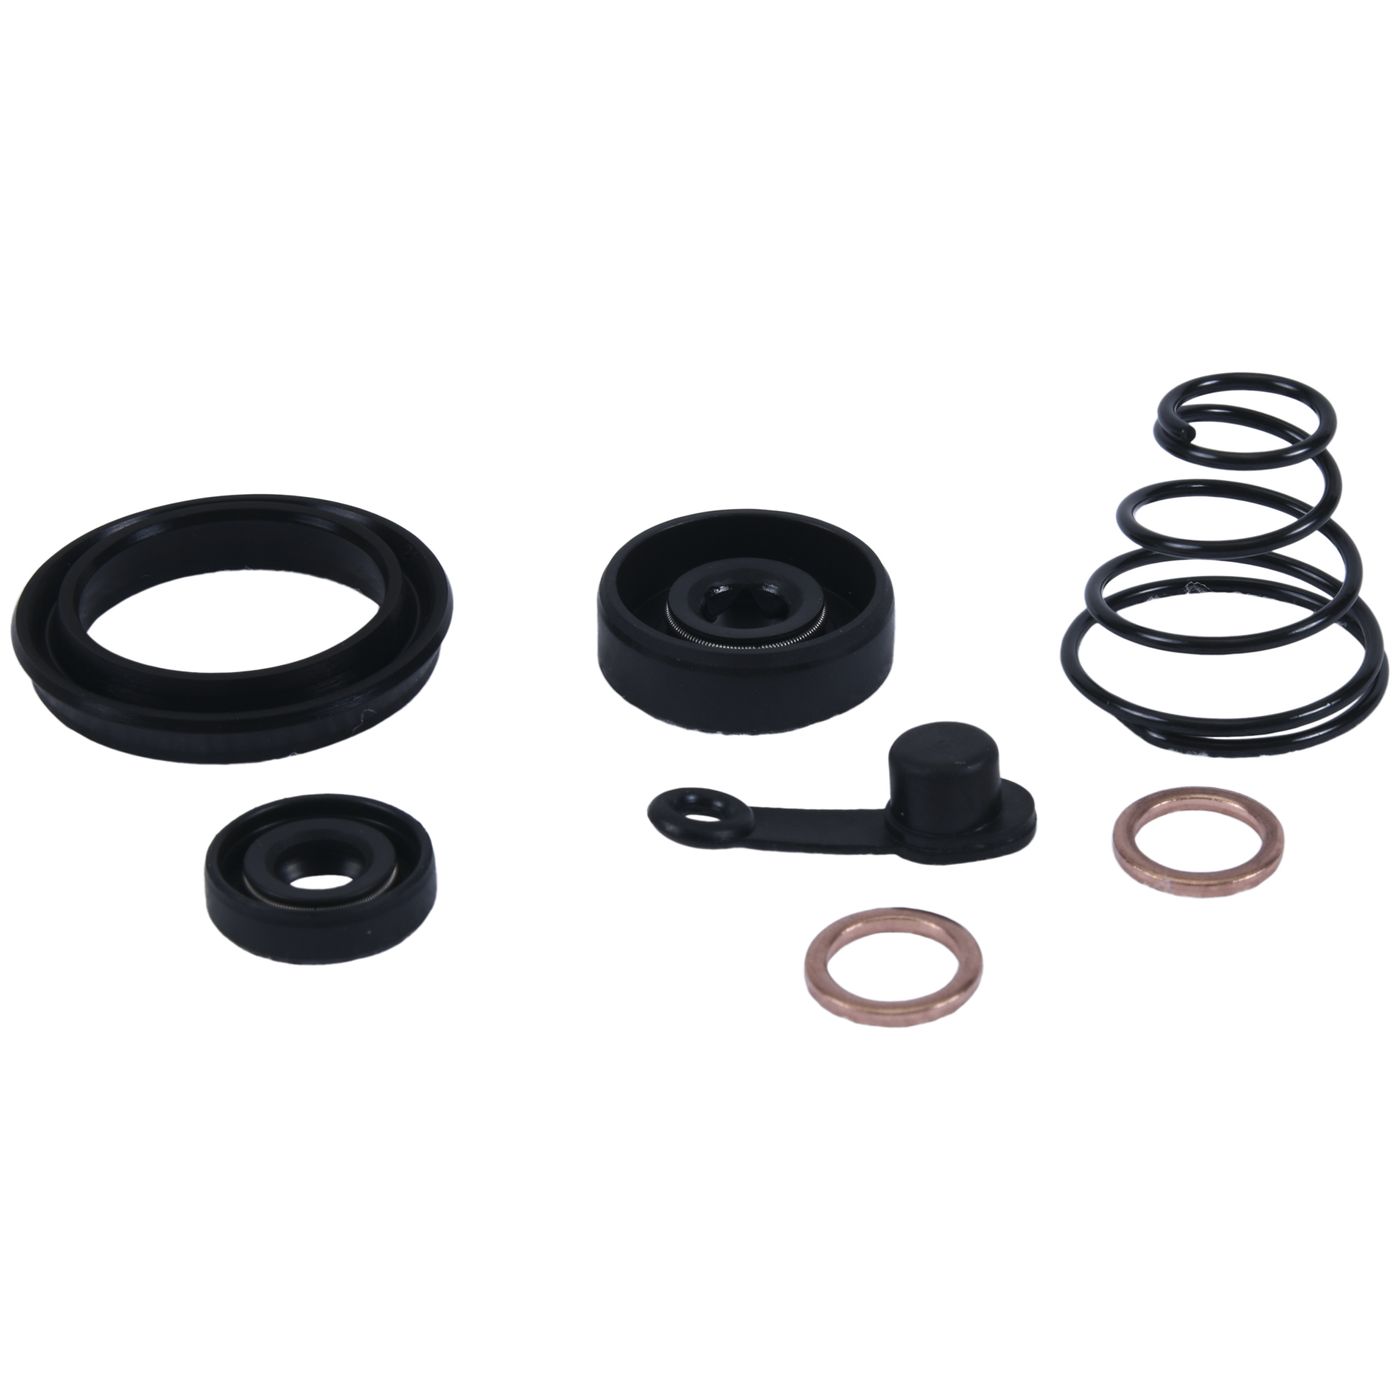 Wrp Clutch Slave Cylinder Kits - WRP186030 image